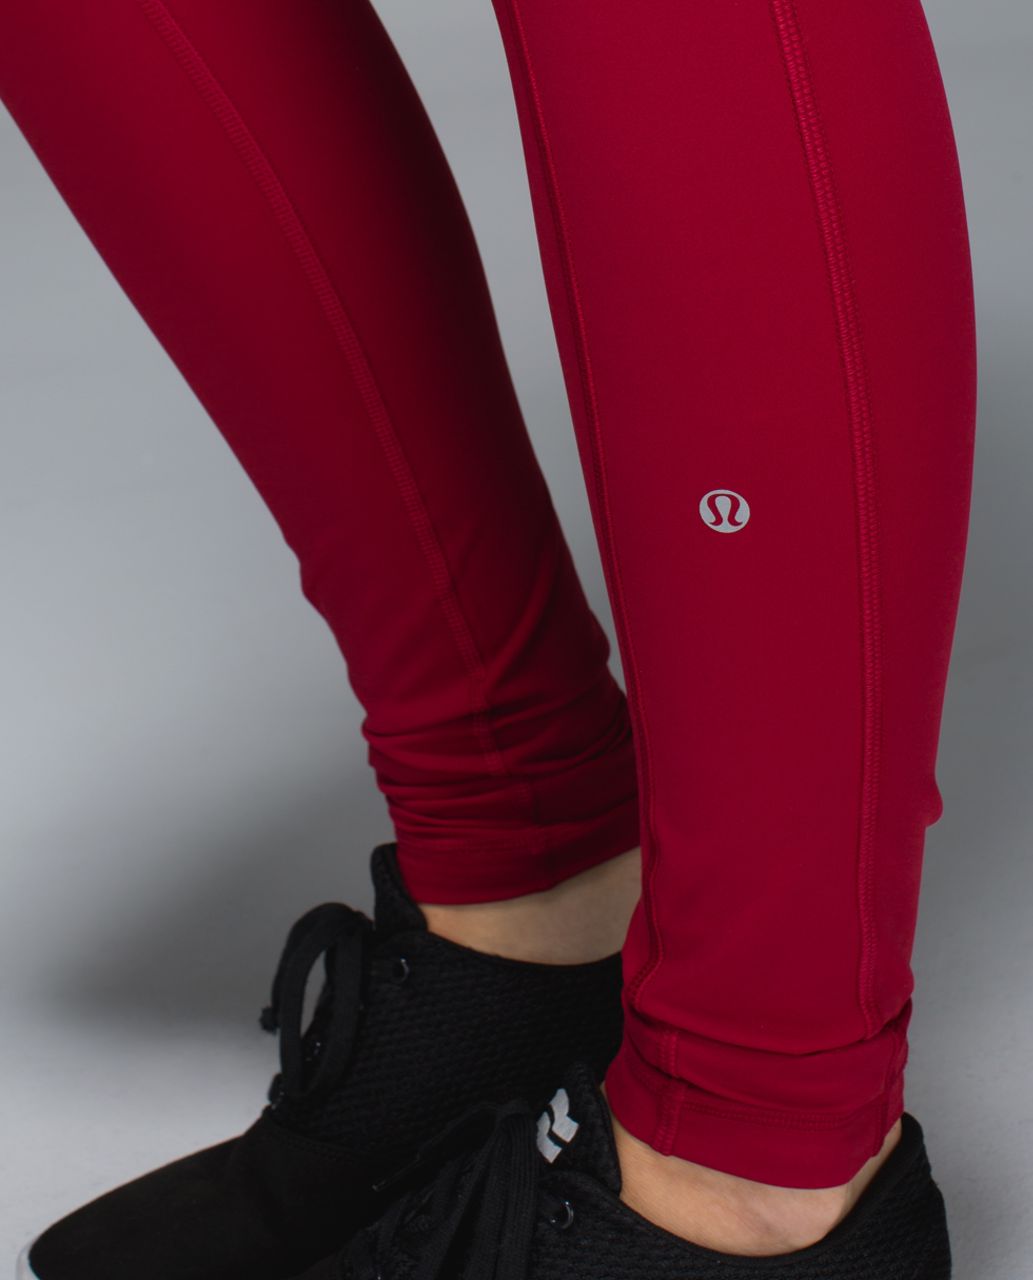 Lululemon Speed Tight II *Full-On Luxtreme (Brushed) - Deepest Cranberry / Wi14 Quilt 20